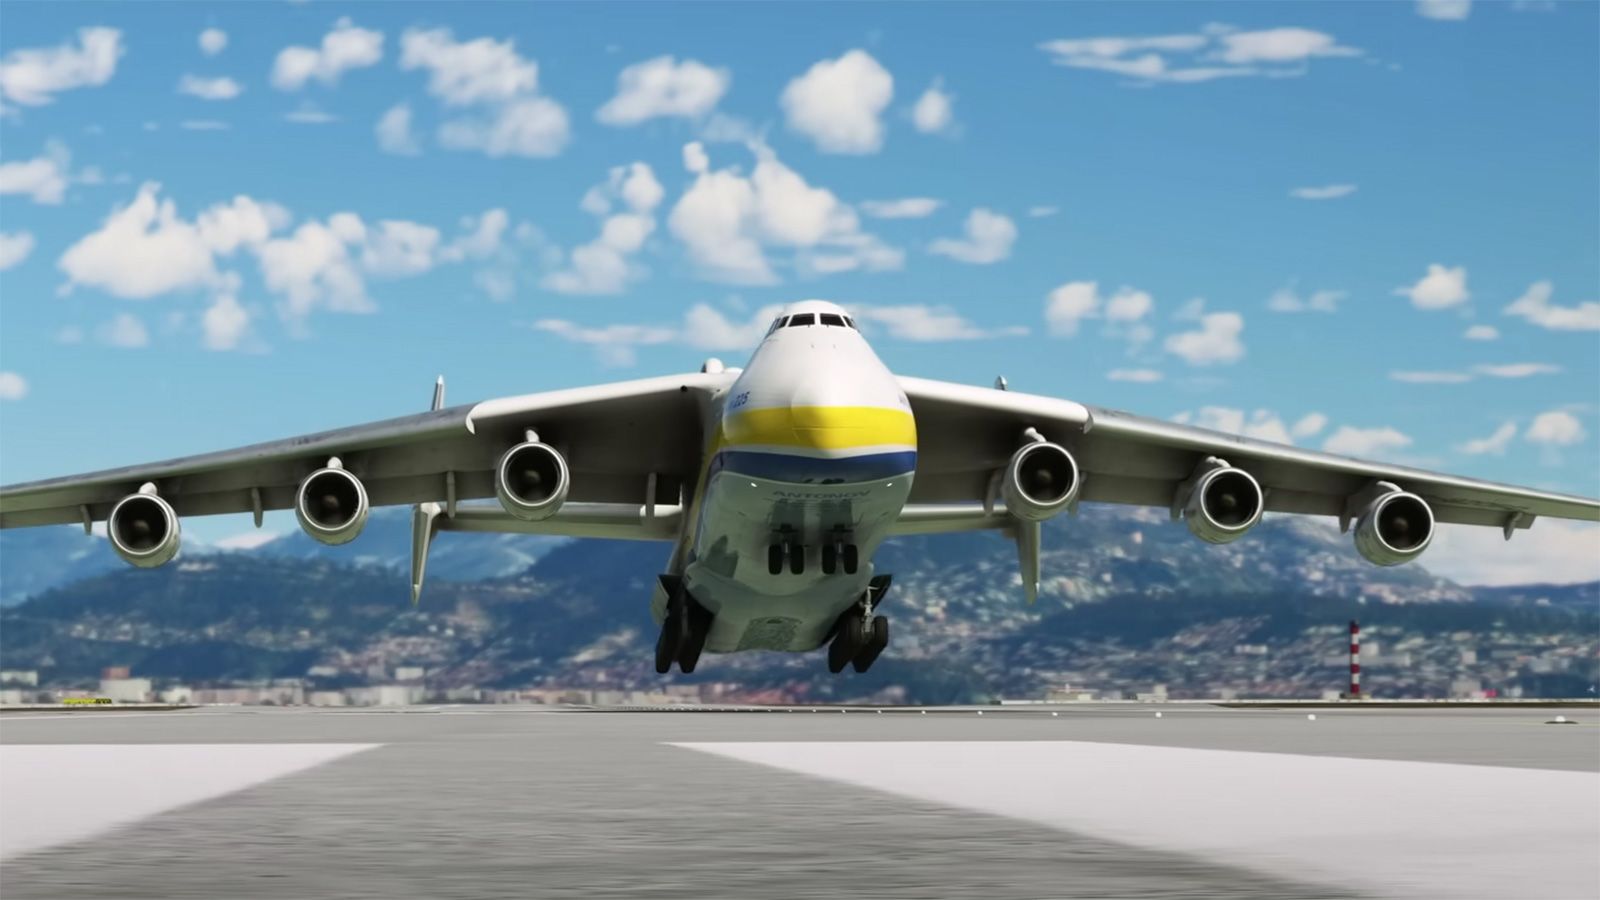 You can now fly an Antonov AN-225 in Microsoft Flight Simulator